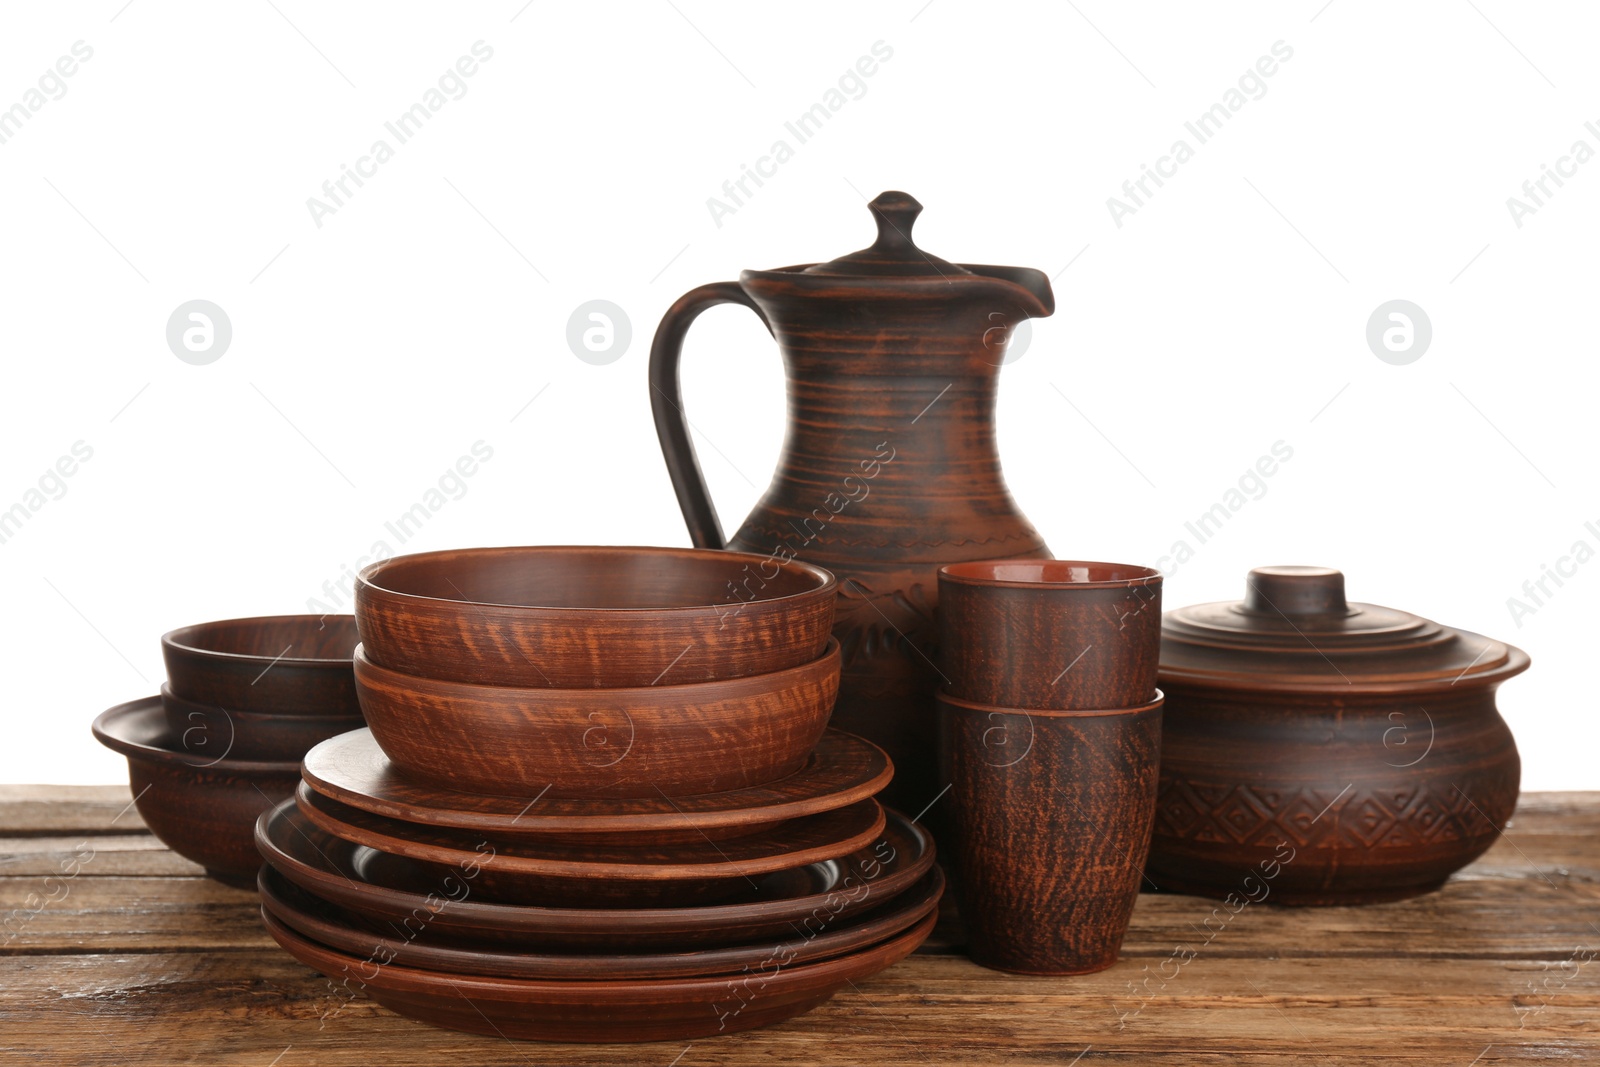 Photo of Different clay dishware on wooden table against white background